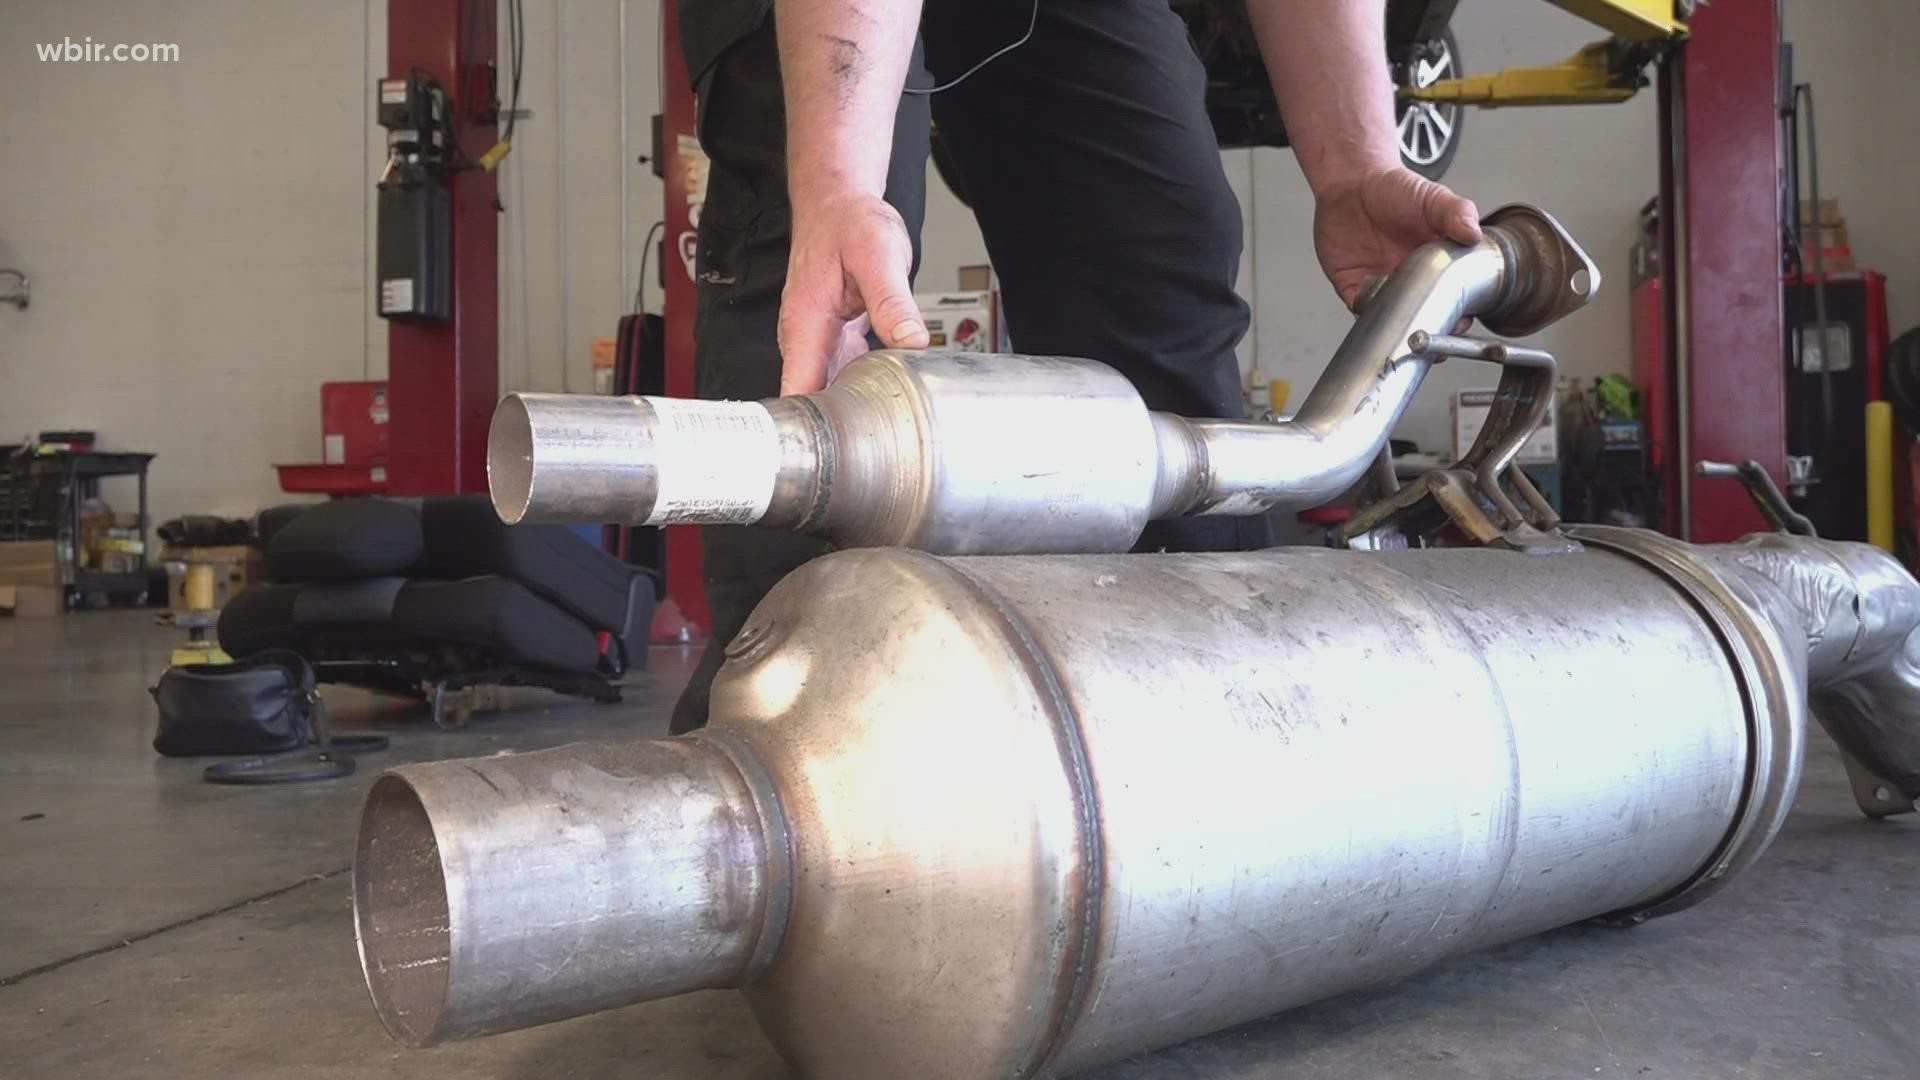 Catalytic converters are disappearing from cars across Knoxville. Authorities said they are being stolen five times more than in previous years.